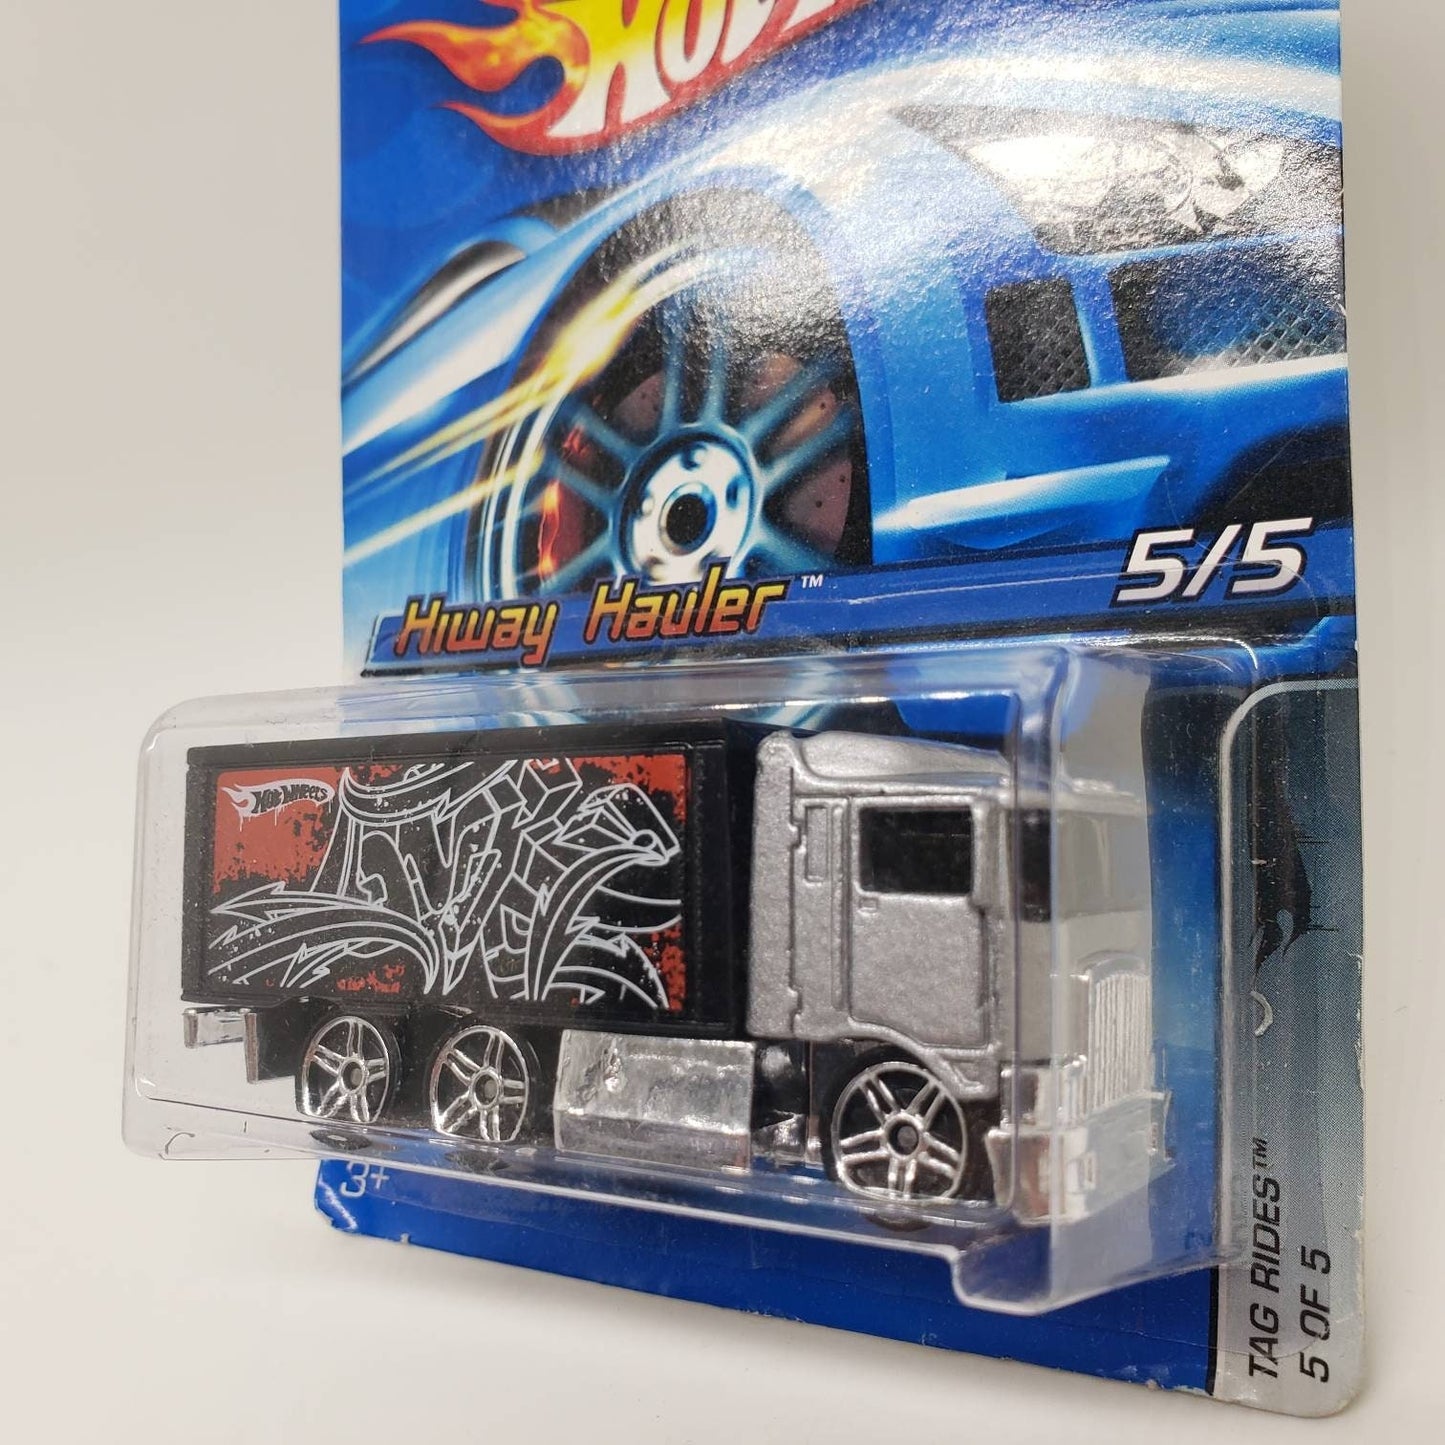 Hiway Hauler - Delivery Truck - Moving Truck - Diecast Metal Car - Model Toy Car - Hot Wheels